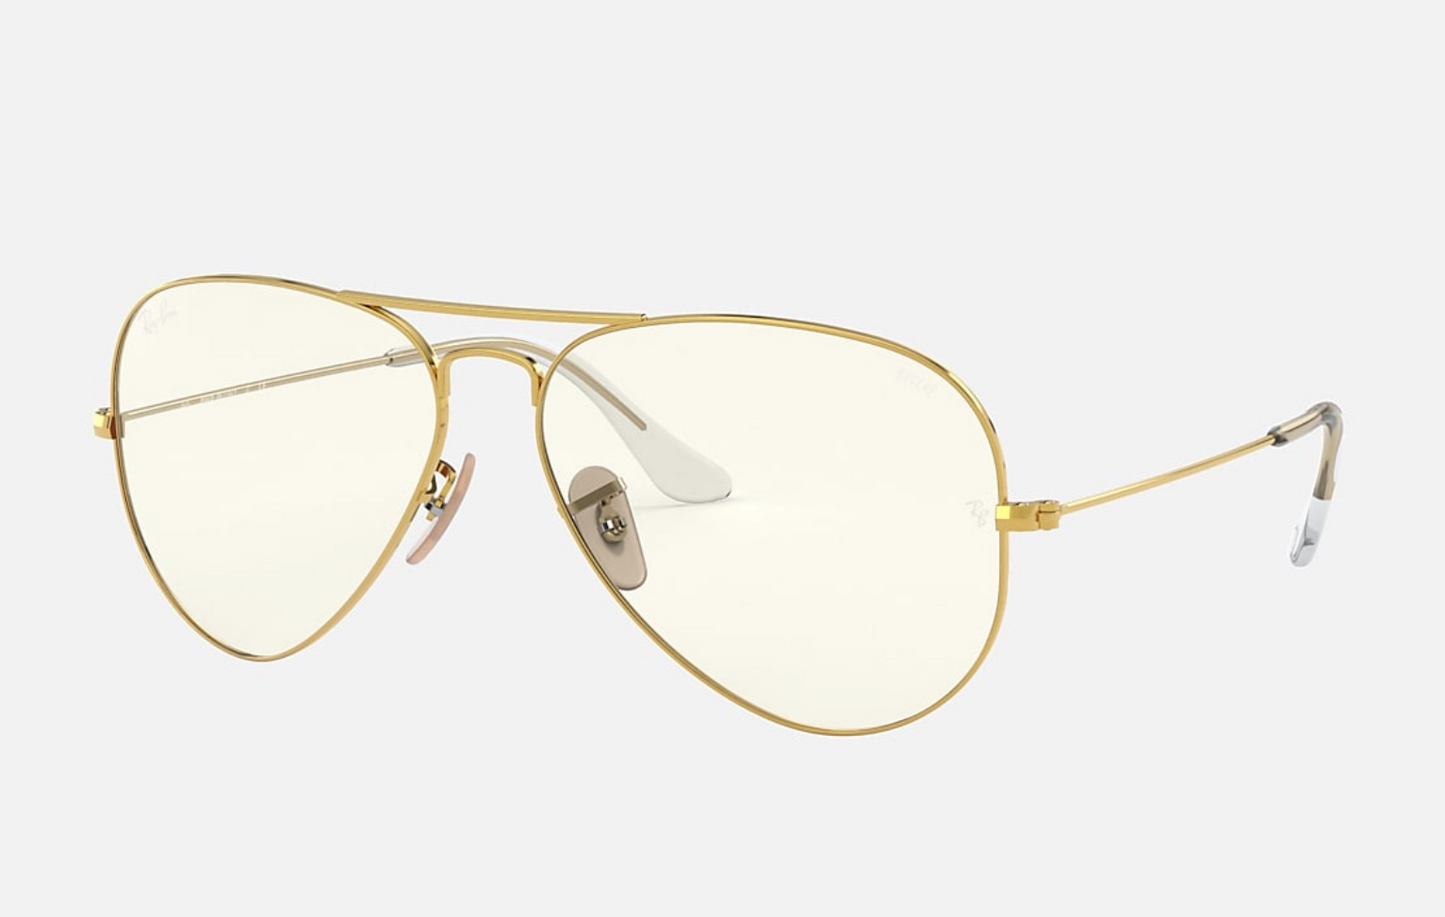 Ray-Ban Aviator Clear to Gray Evolve 58mm Photochromatic